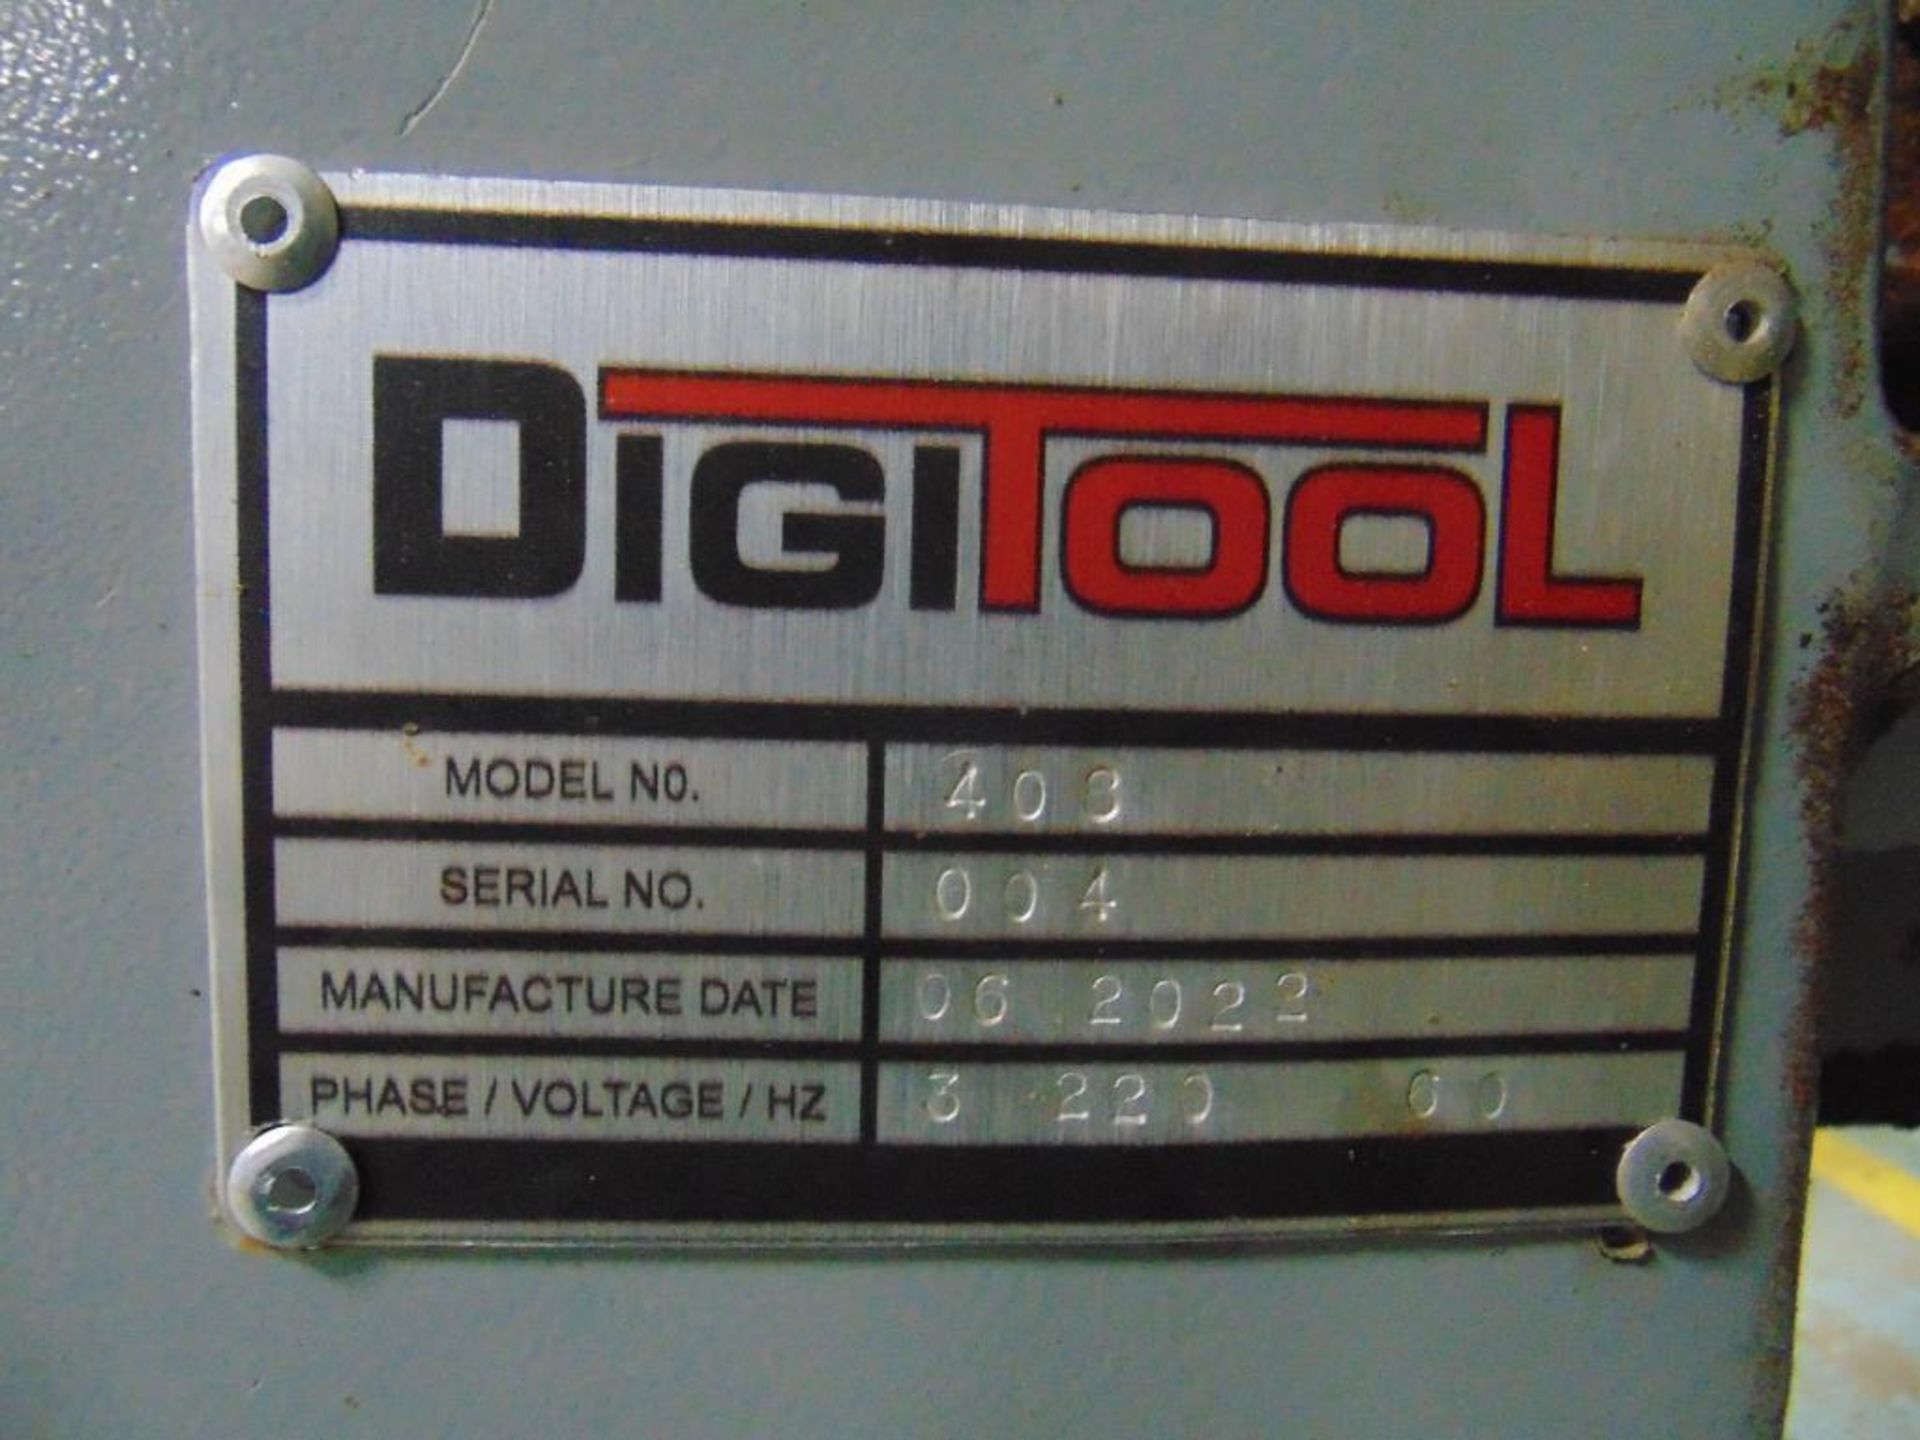 Digitool Model DT408 CNC Router - Image 9 of 9